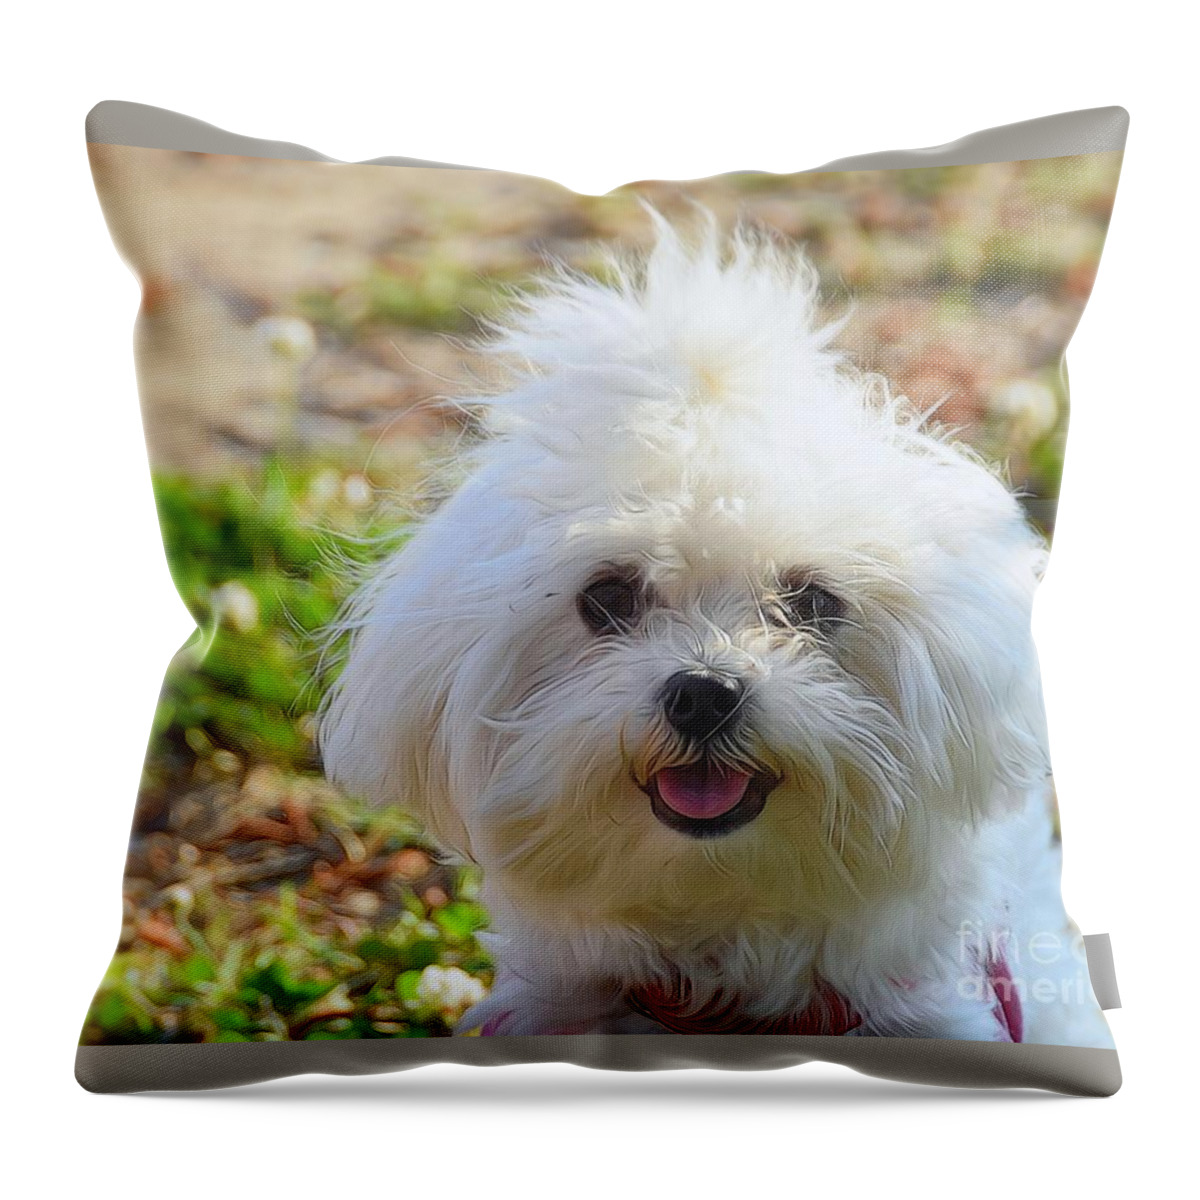 Lap Dogs-puppy-playful-affectionate-animal Throw Pillow featuring the photograph Momma's Baby by Scott Cameron